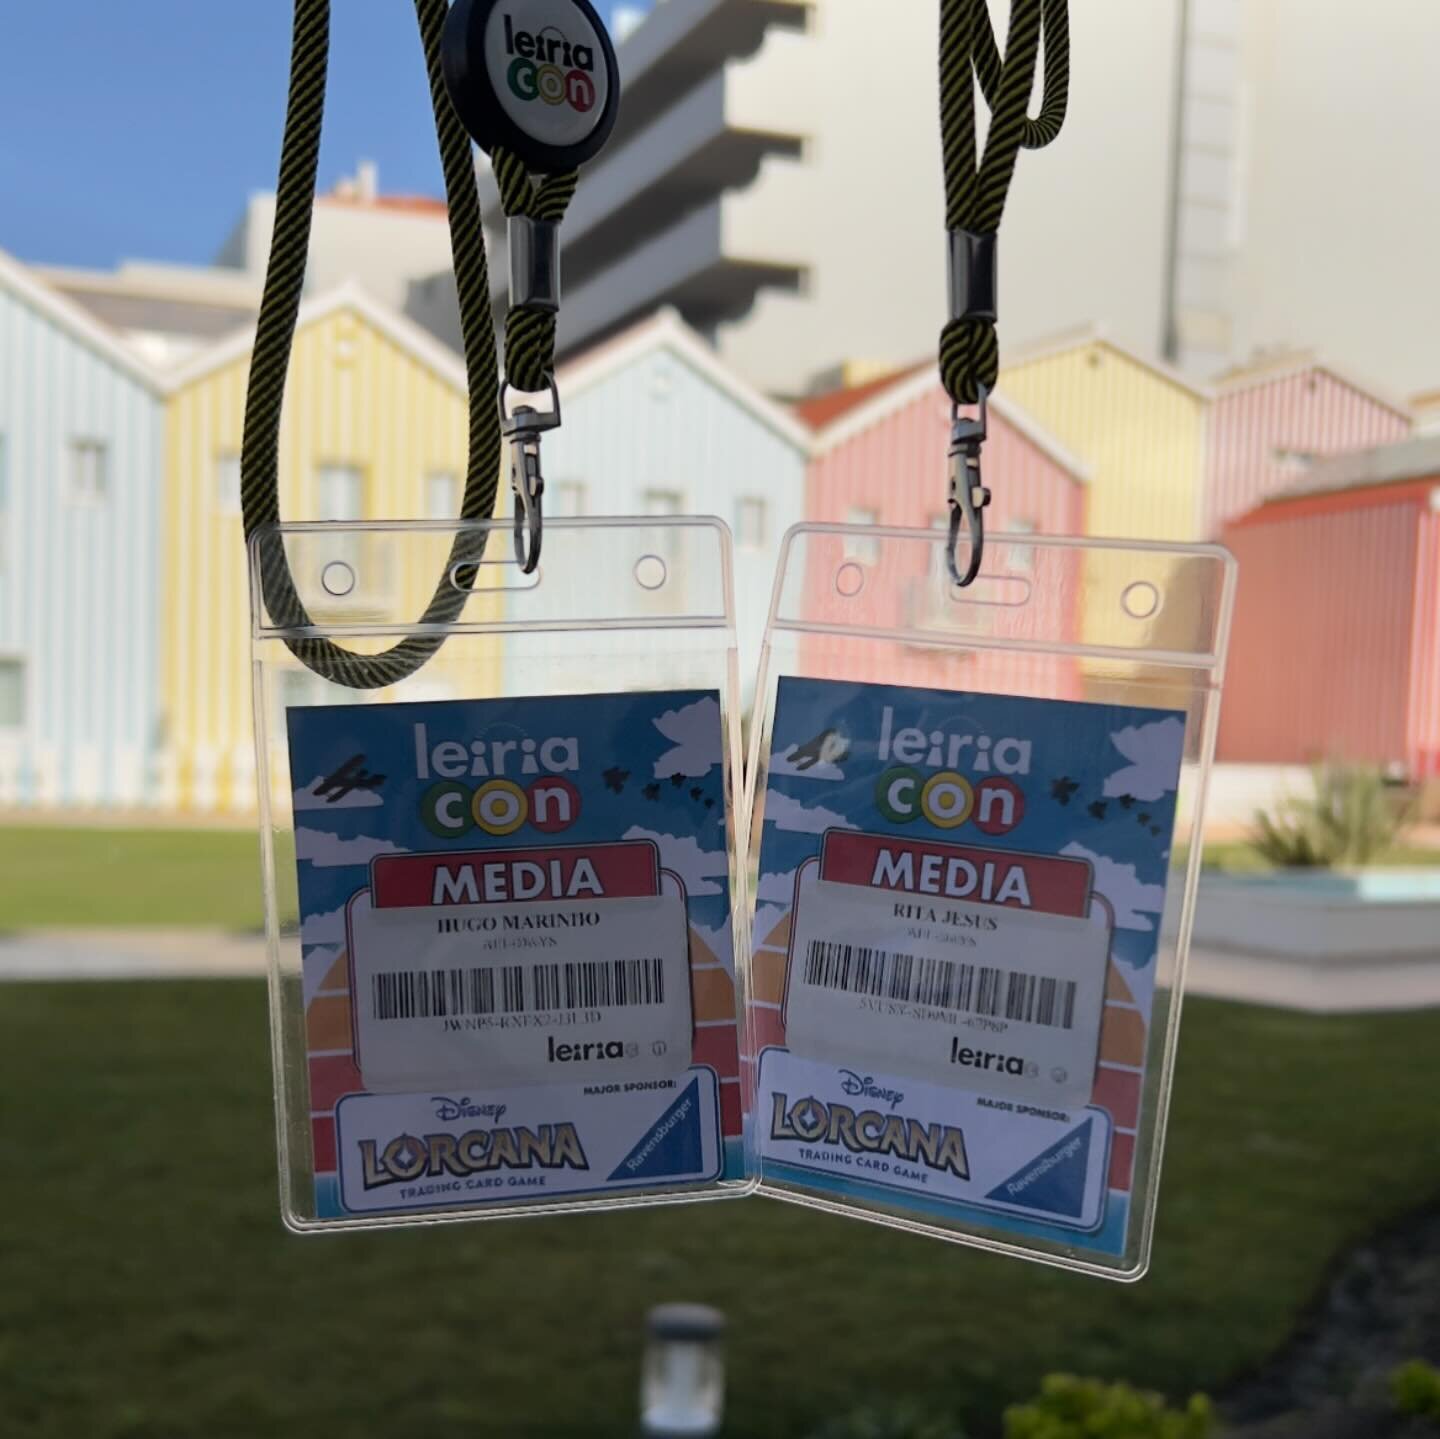 🇵🇹⬇️//🇬🇧 Yesterday we returned home from LeiriaCon which inaugurated the convention season for 2024 in Portugal. Those were 5 days full of games, gaming and gamers but, most importantly, were 5 days with our hearts full due to the moments we spen